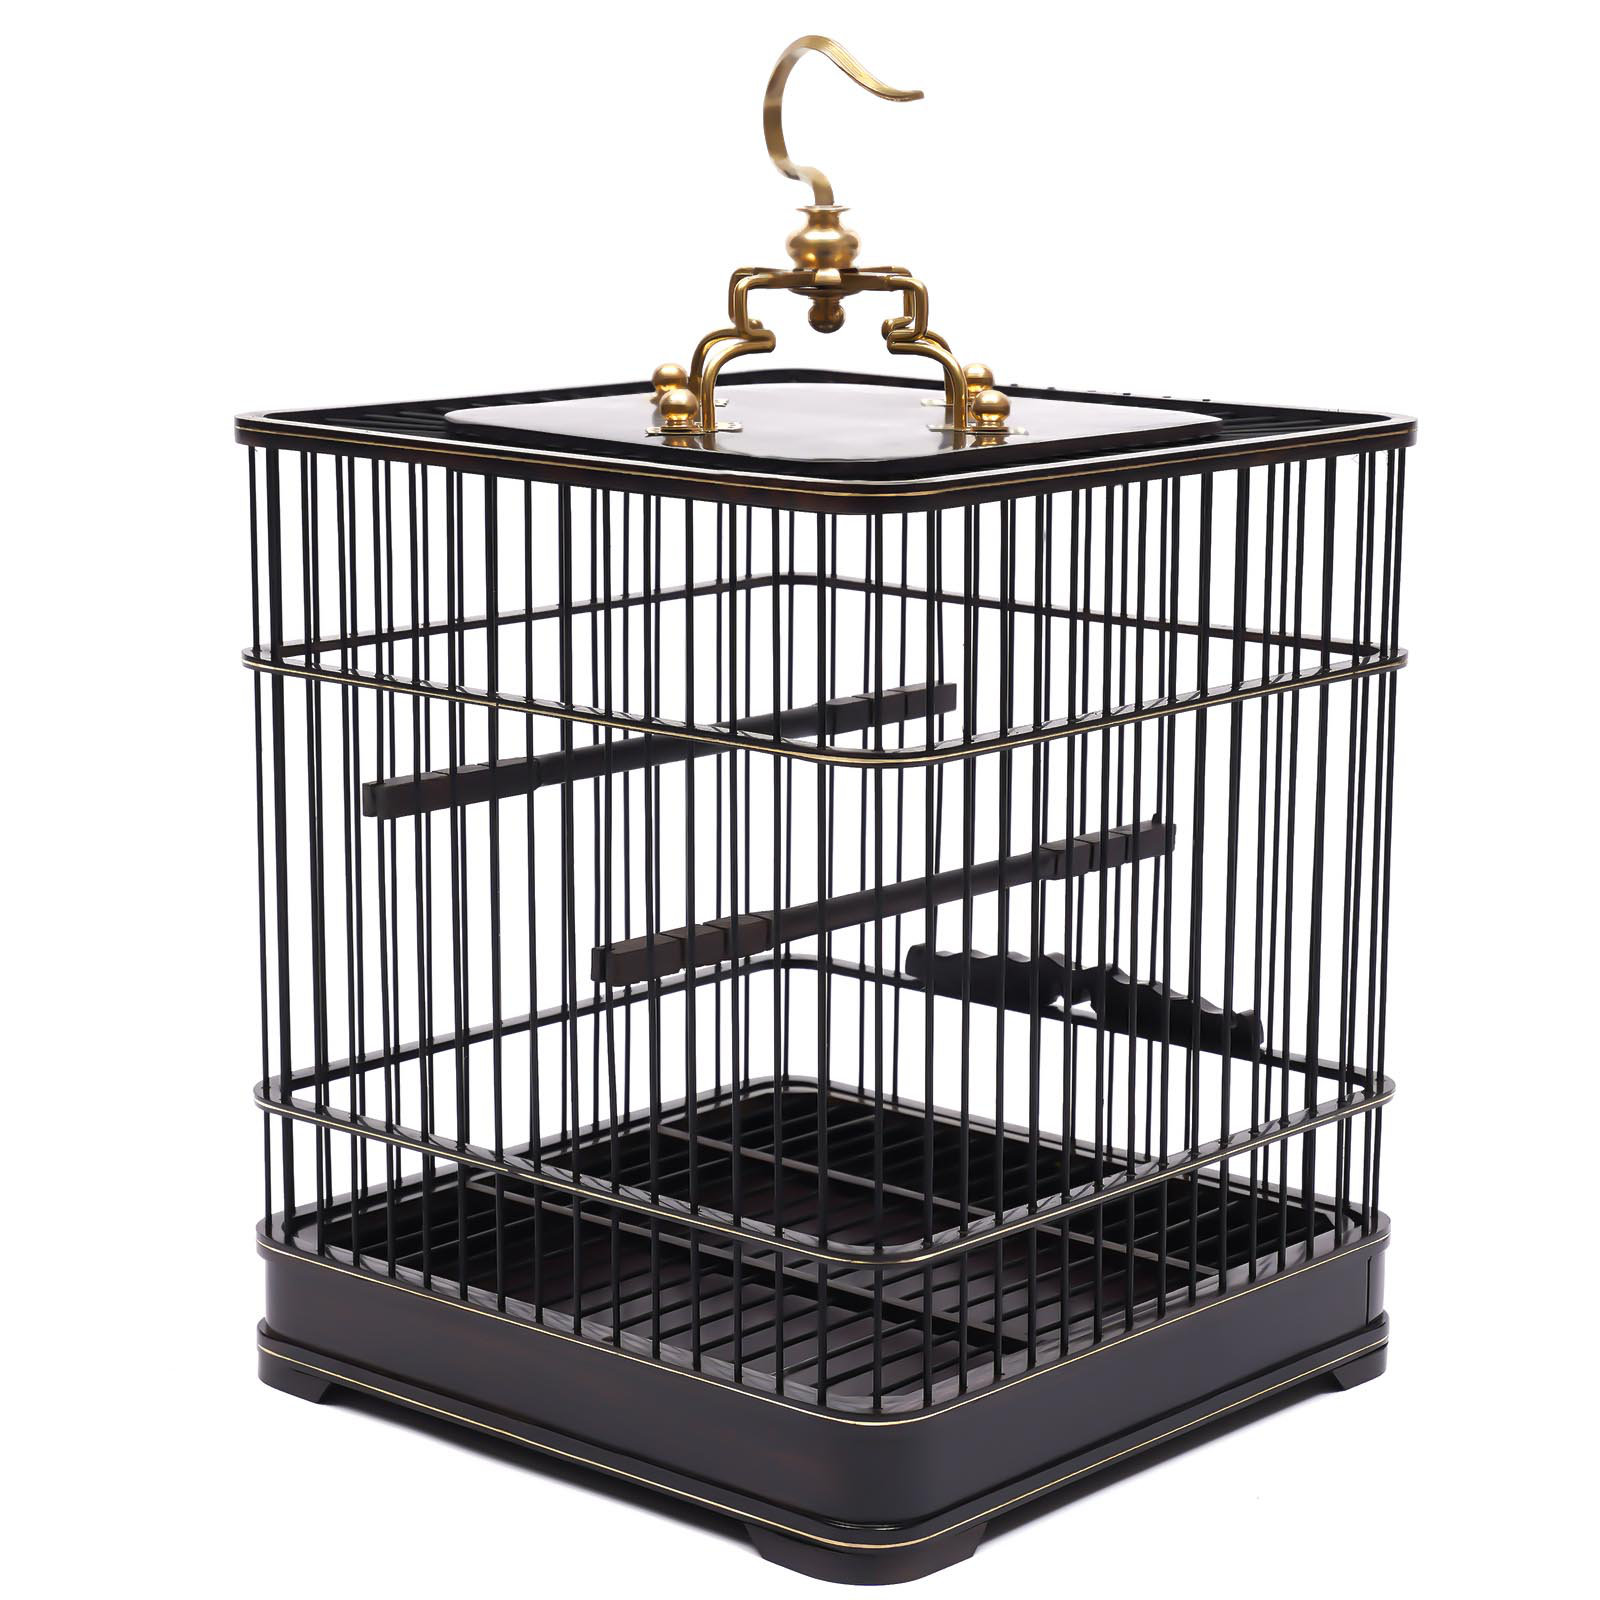 Jaden 62 Steel Victorian Top Hanging Bird Cage Stand with Tray